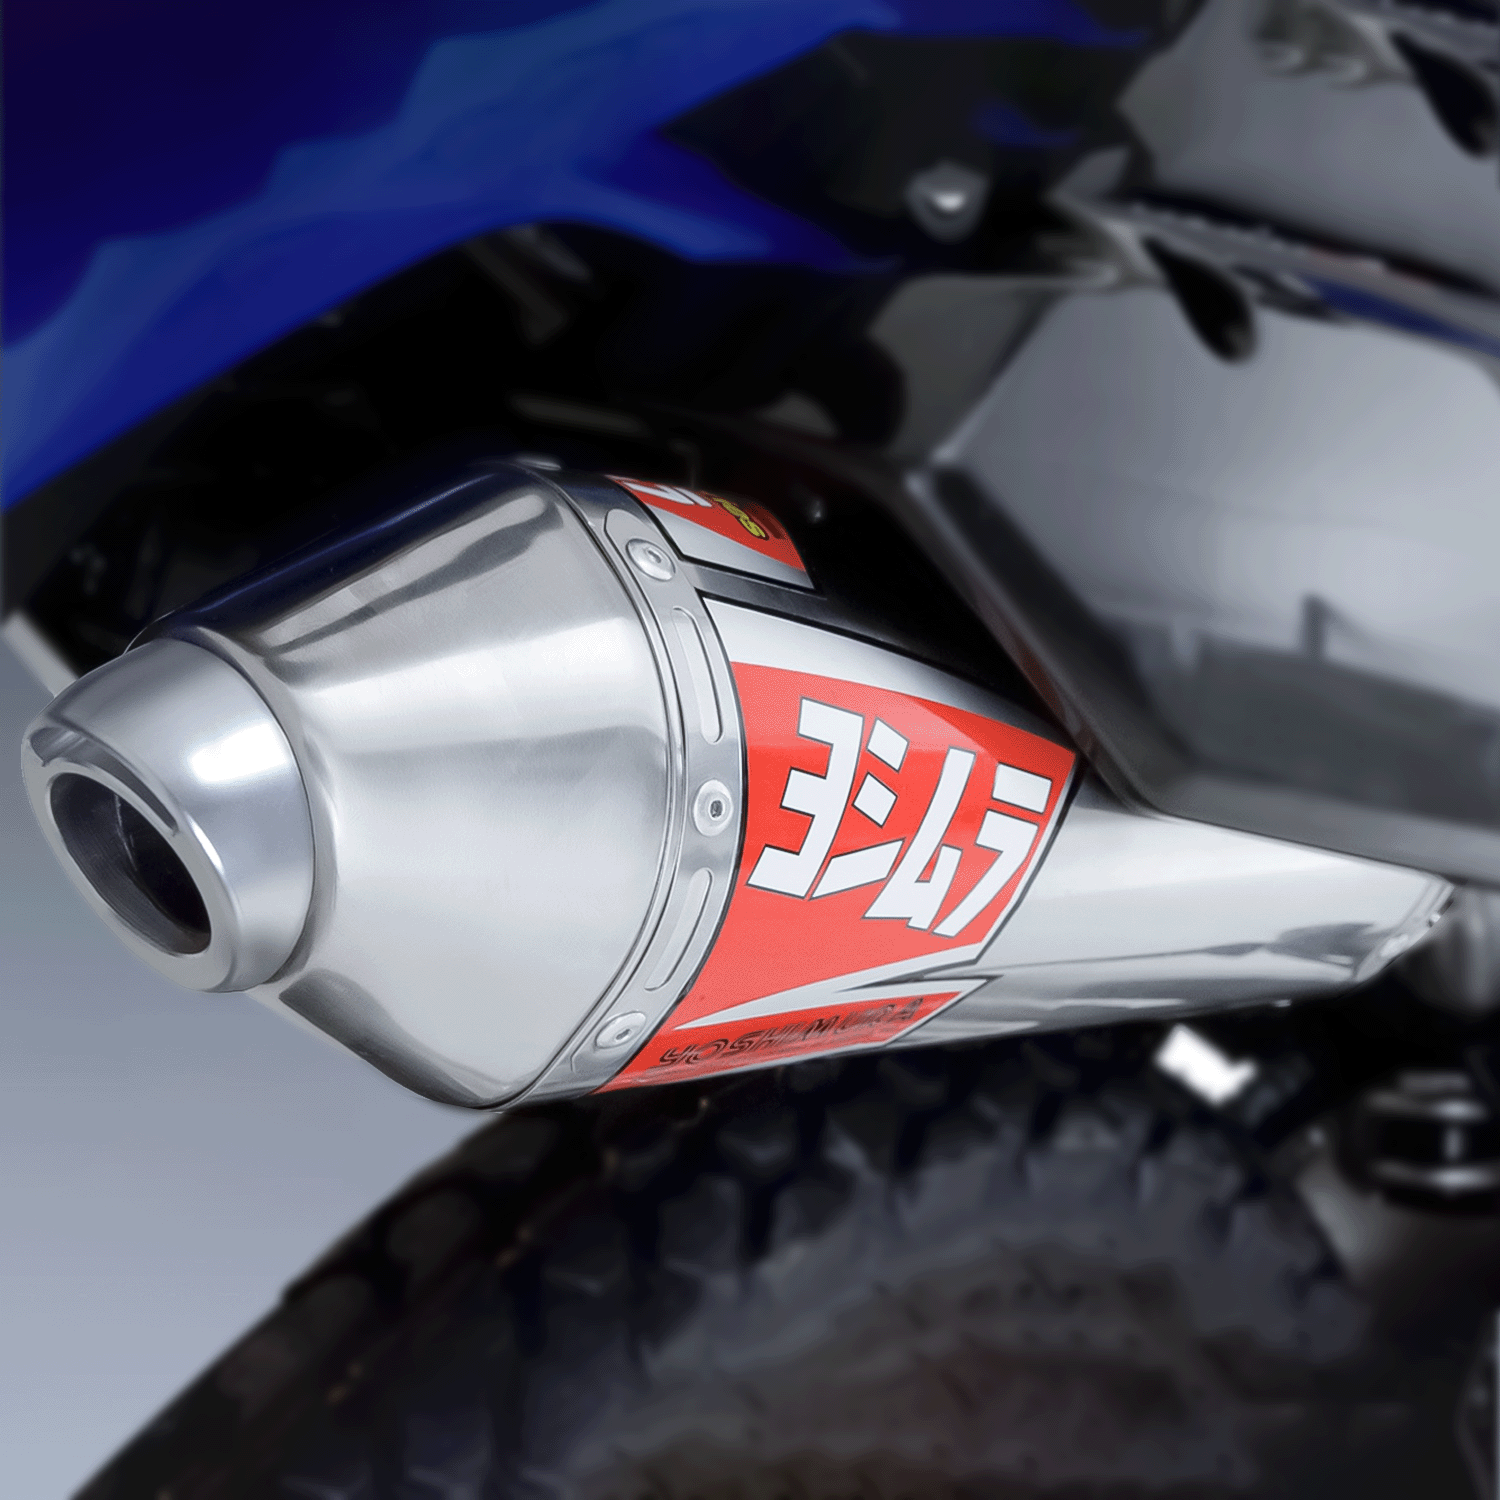 KLR650 03-18 Race RS-2 Stainless Slip-On Exhaust, w/ Stainless Muffler